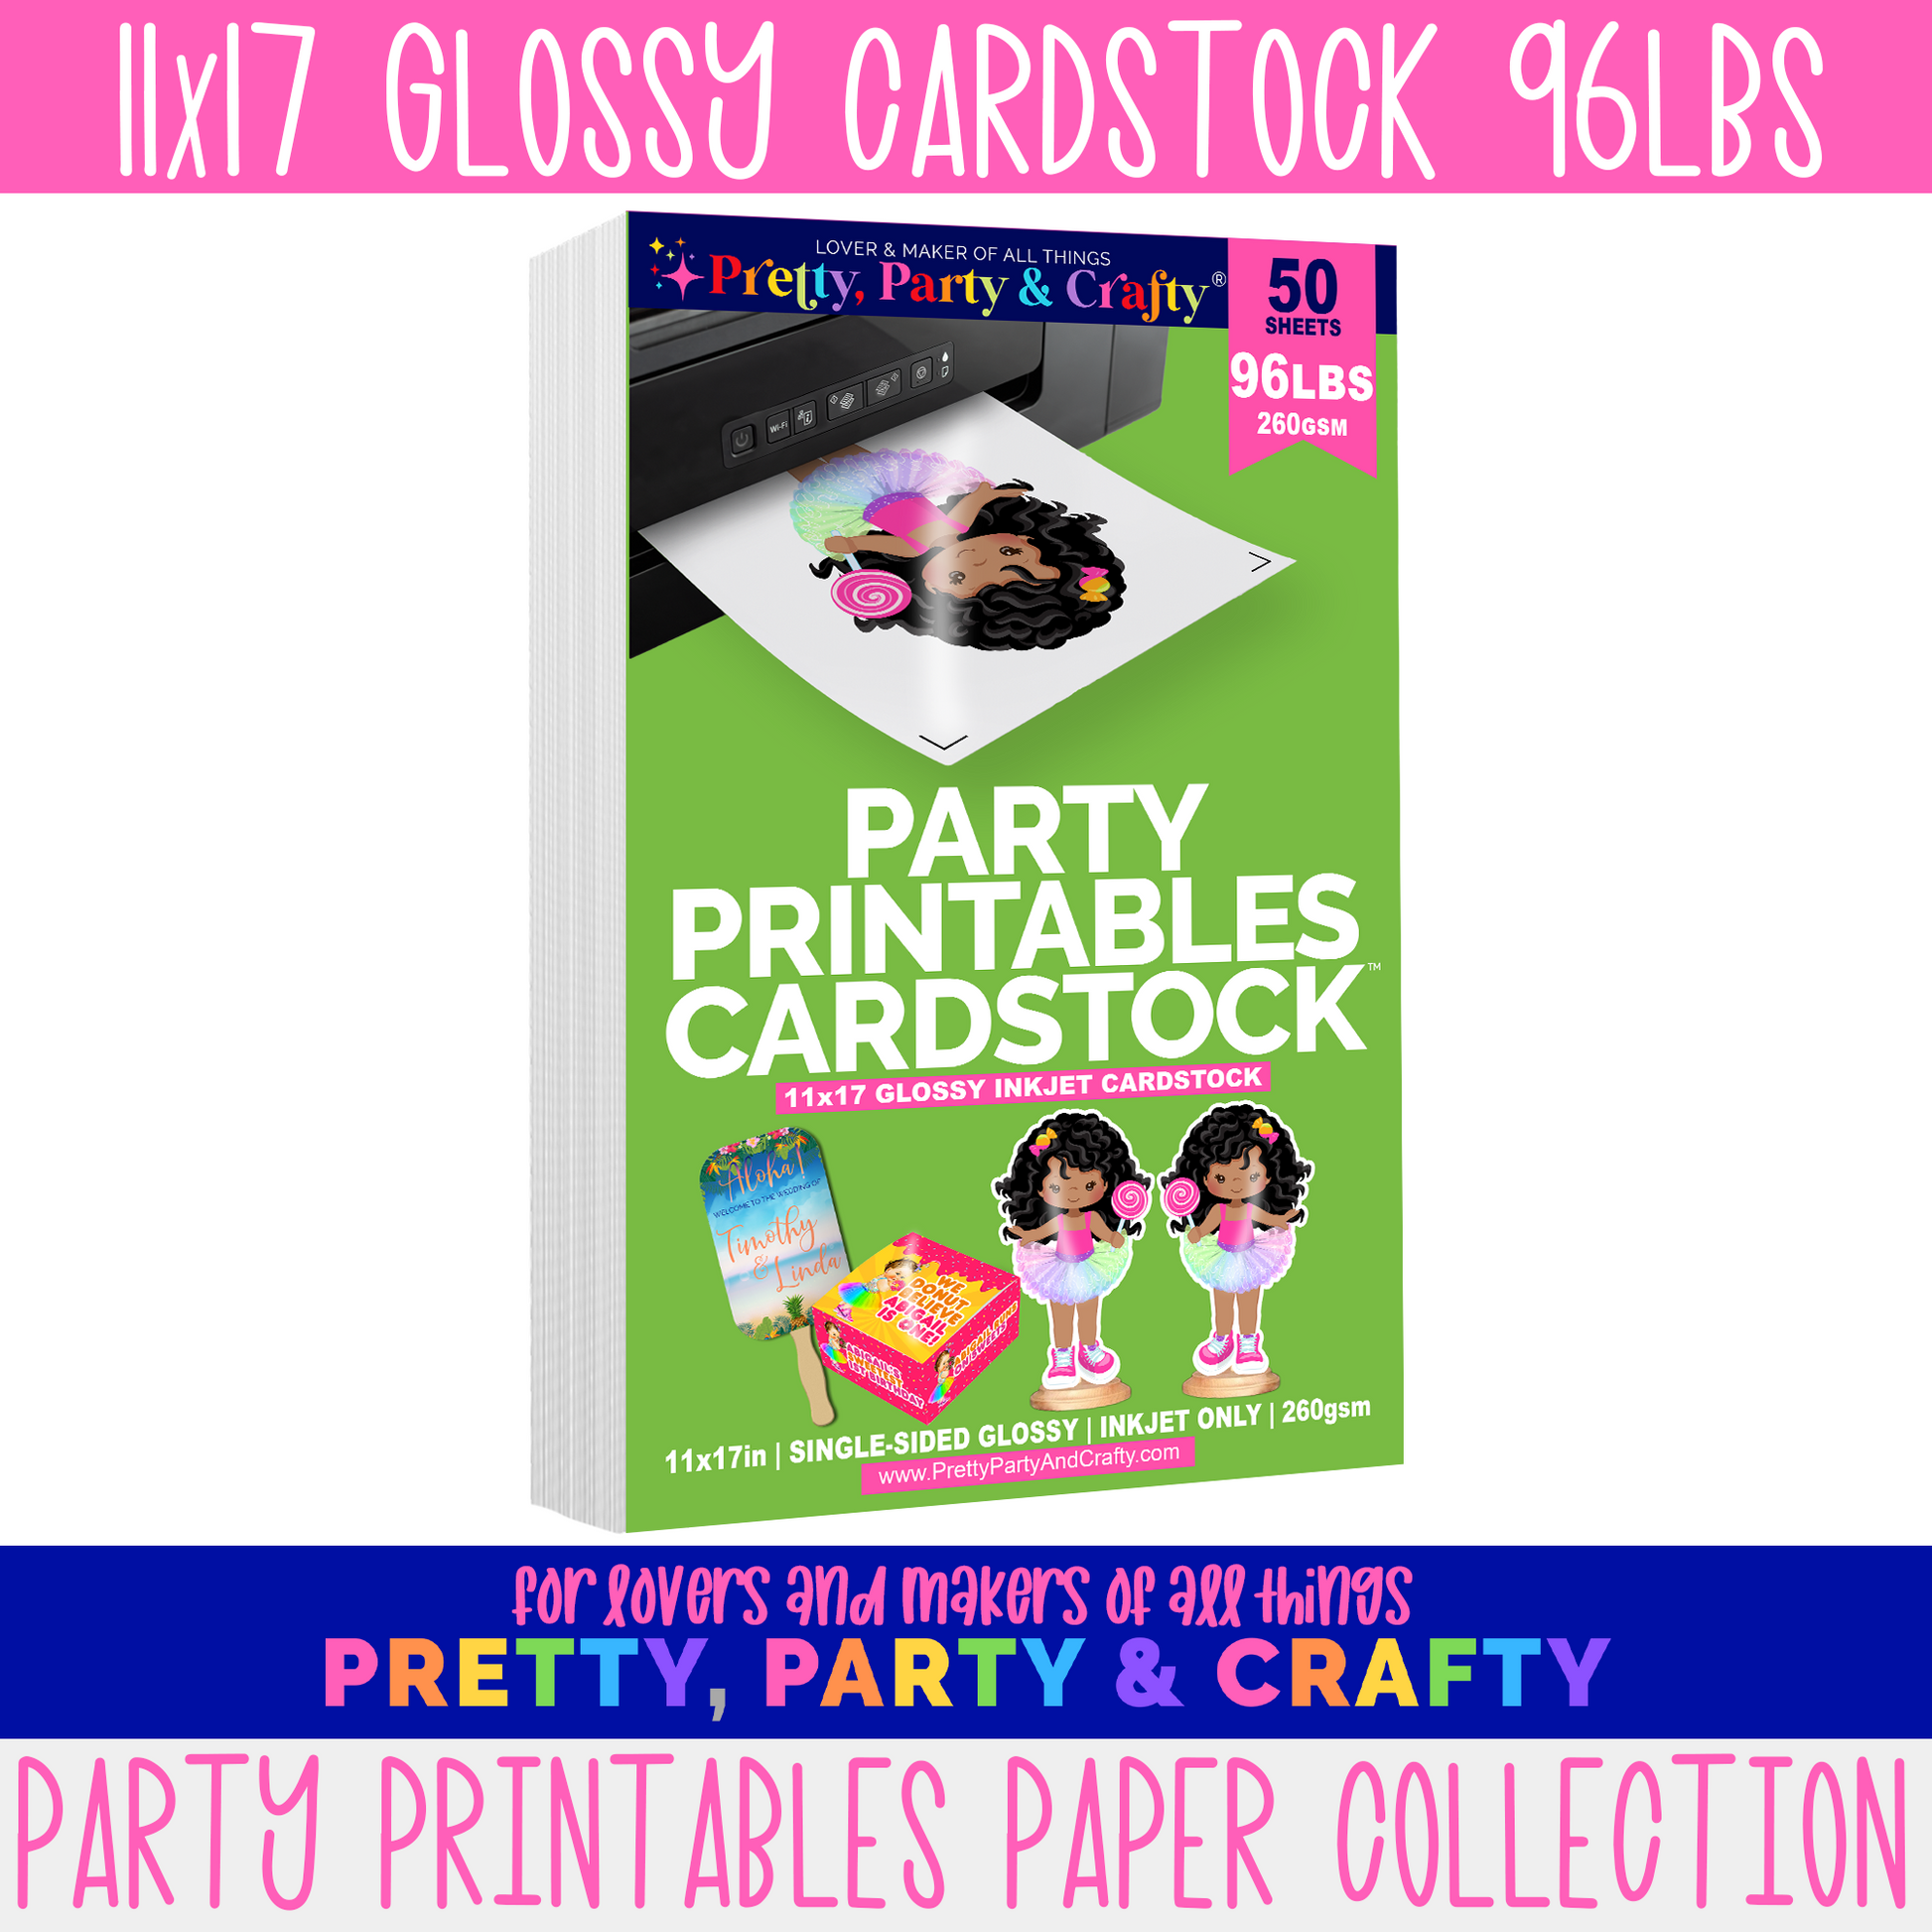 8.5x11 GLOSSY CARDSTOCK 96lbs – INKJET ONLY